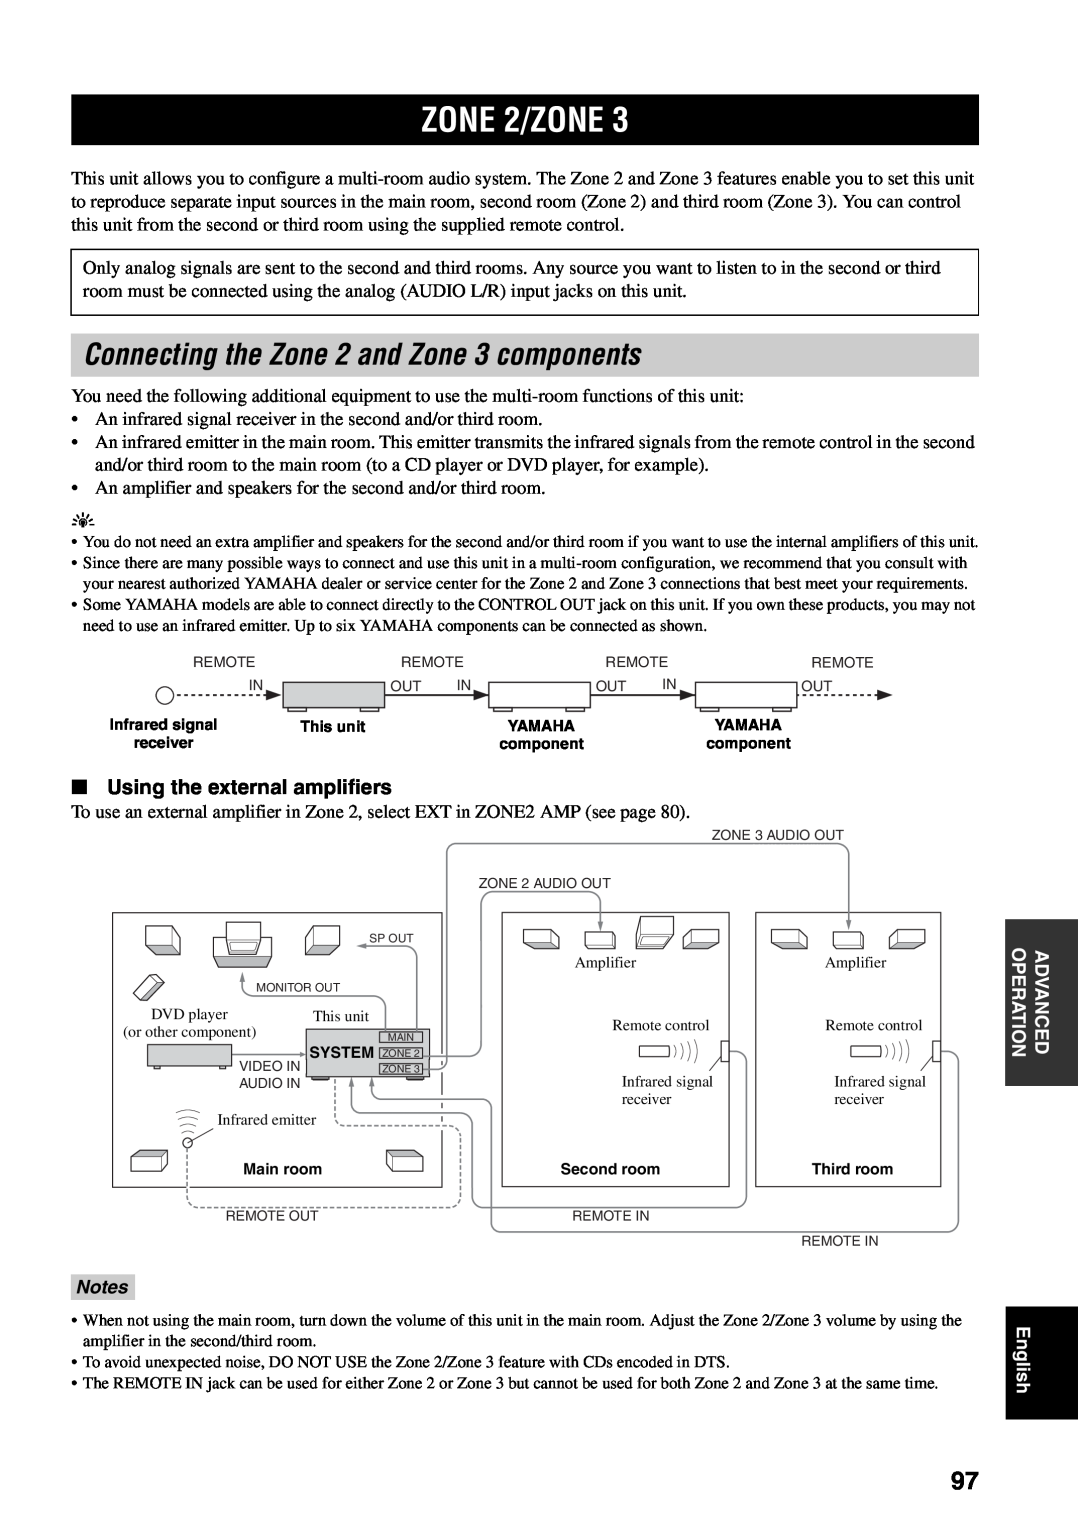 Yamaha RX-V1600 owner manual ZONE 2/ZONE, Connecting the Zone 2 and Zone 3 components, Using the external amplifiers, Notes 